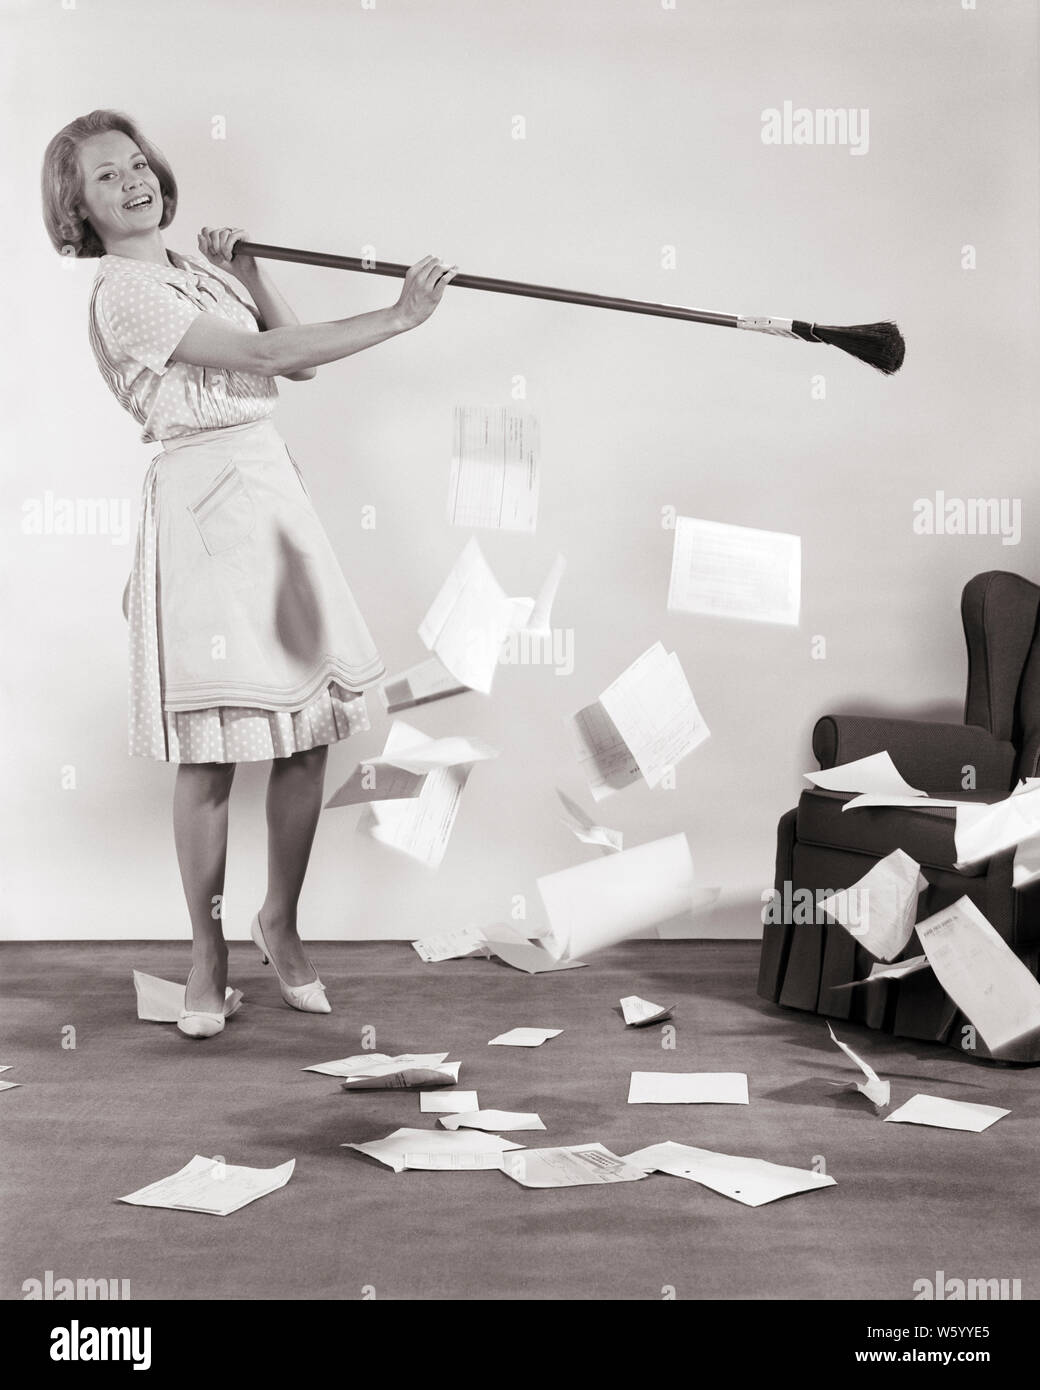 1960s WOMAN WITH BROOM SWEEPING UP PAPERS BILLS MAKING A CLEAN SWEEP STARTING FRESH ANEW - s15420 HAR001 HARS FULL-LENGTH LADIES PERSONS BROOM CONFIDENCE B&W FREEDOM GOALS HOMEMAKER FRESH HAPPINESS HOMEMAKERS CHEERFUL SWEEPING EXCITEMENT EXTERIOR POLKA DOTS PRIDE OPPORTUNITY UP AUTHORITY HOUSEWIVES SMILES JOYFUL STYLISH SOLUTIONS SWEEP YOUNG ADULT WOMAN BLACK AND WHITE CAUCASIAN ETHNICITY HAR001 HIGH HEELS OLD FASHIONED Stock Photo